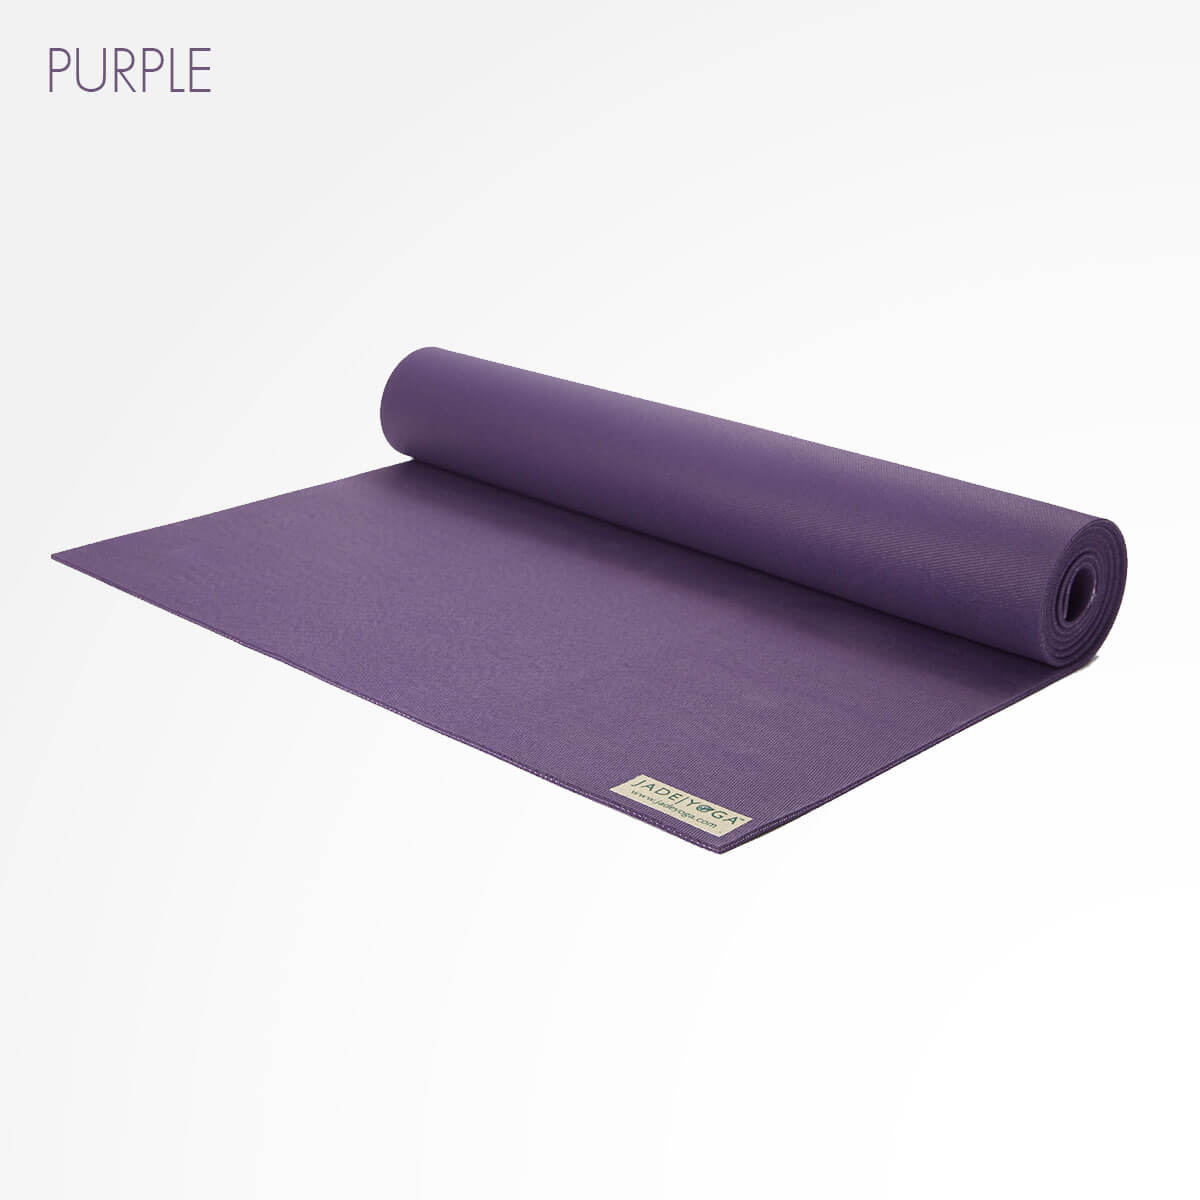 Yoga Props: All About Mats, Bricks, Straps, and More